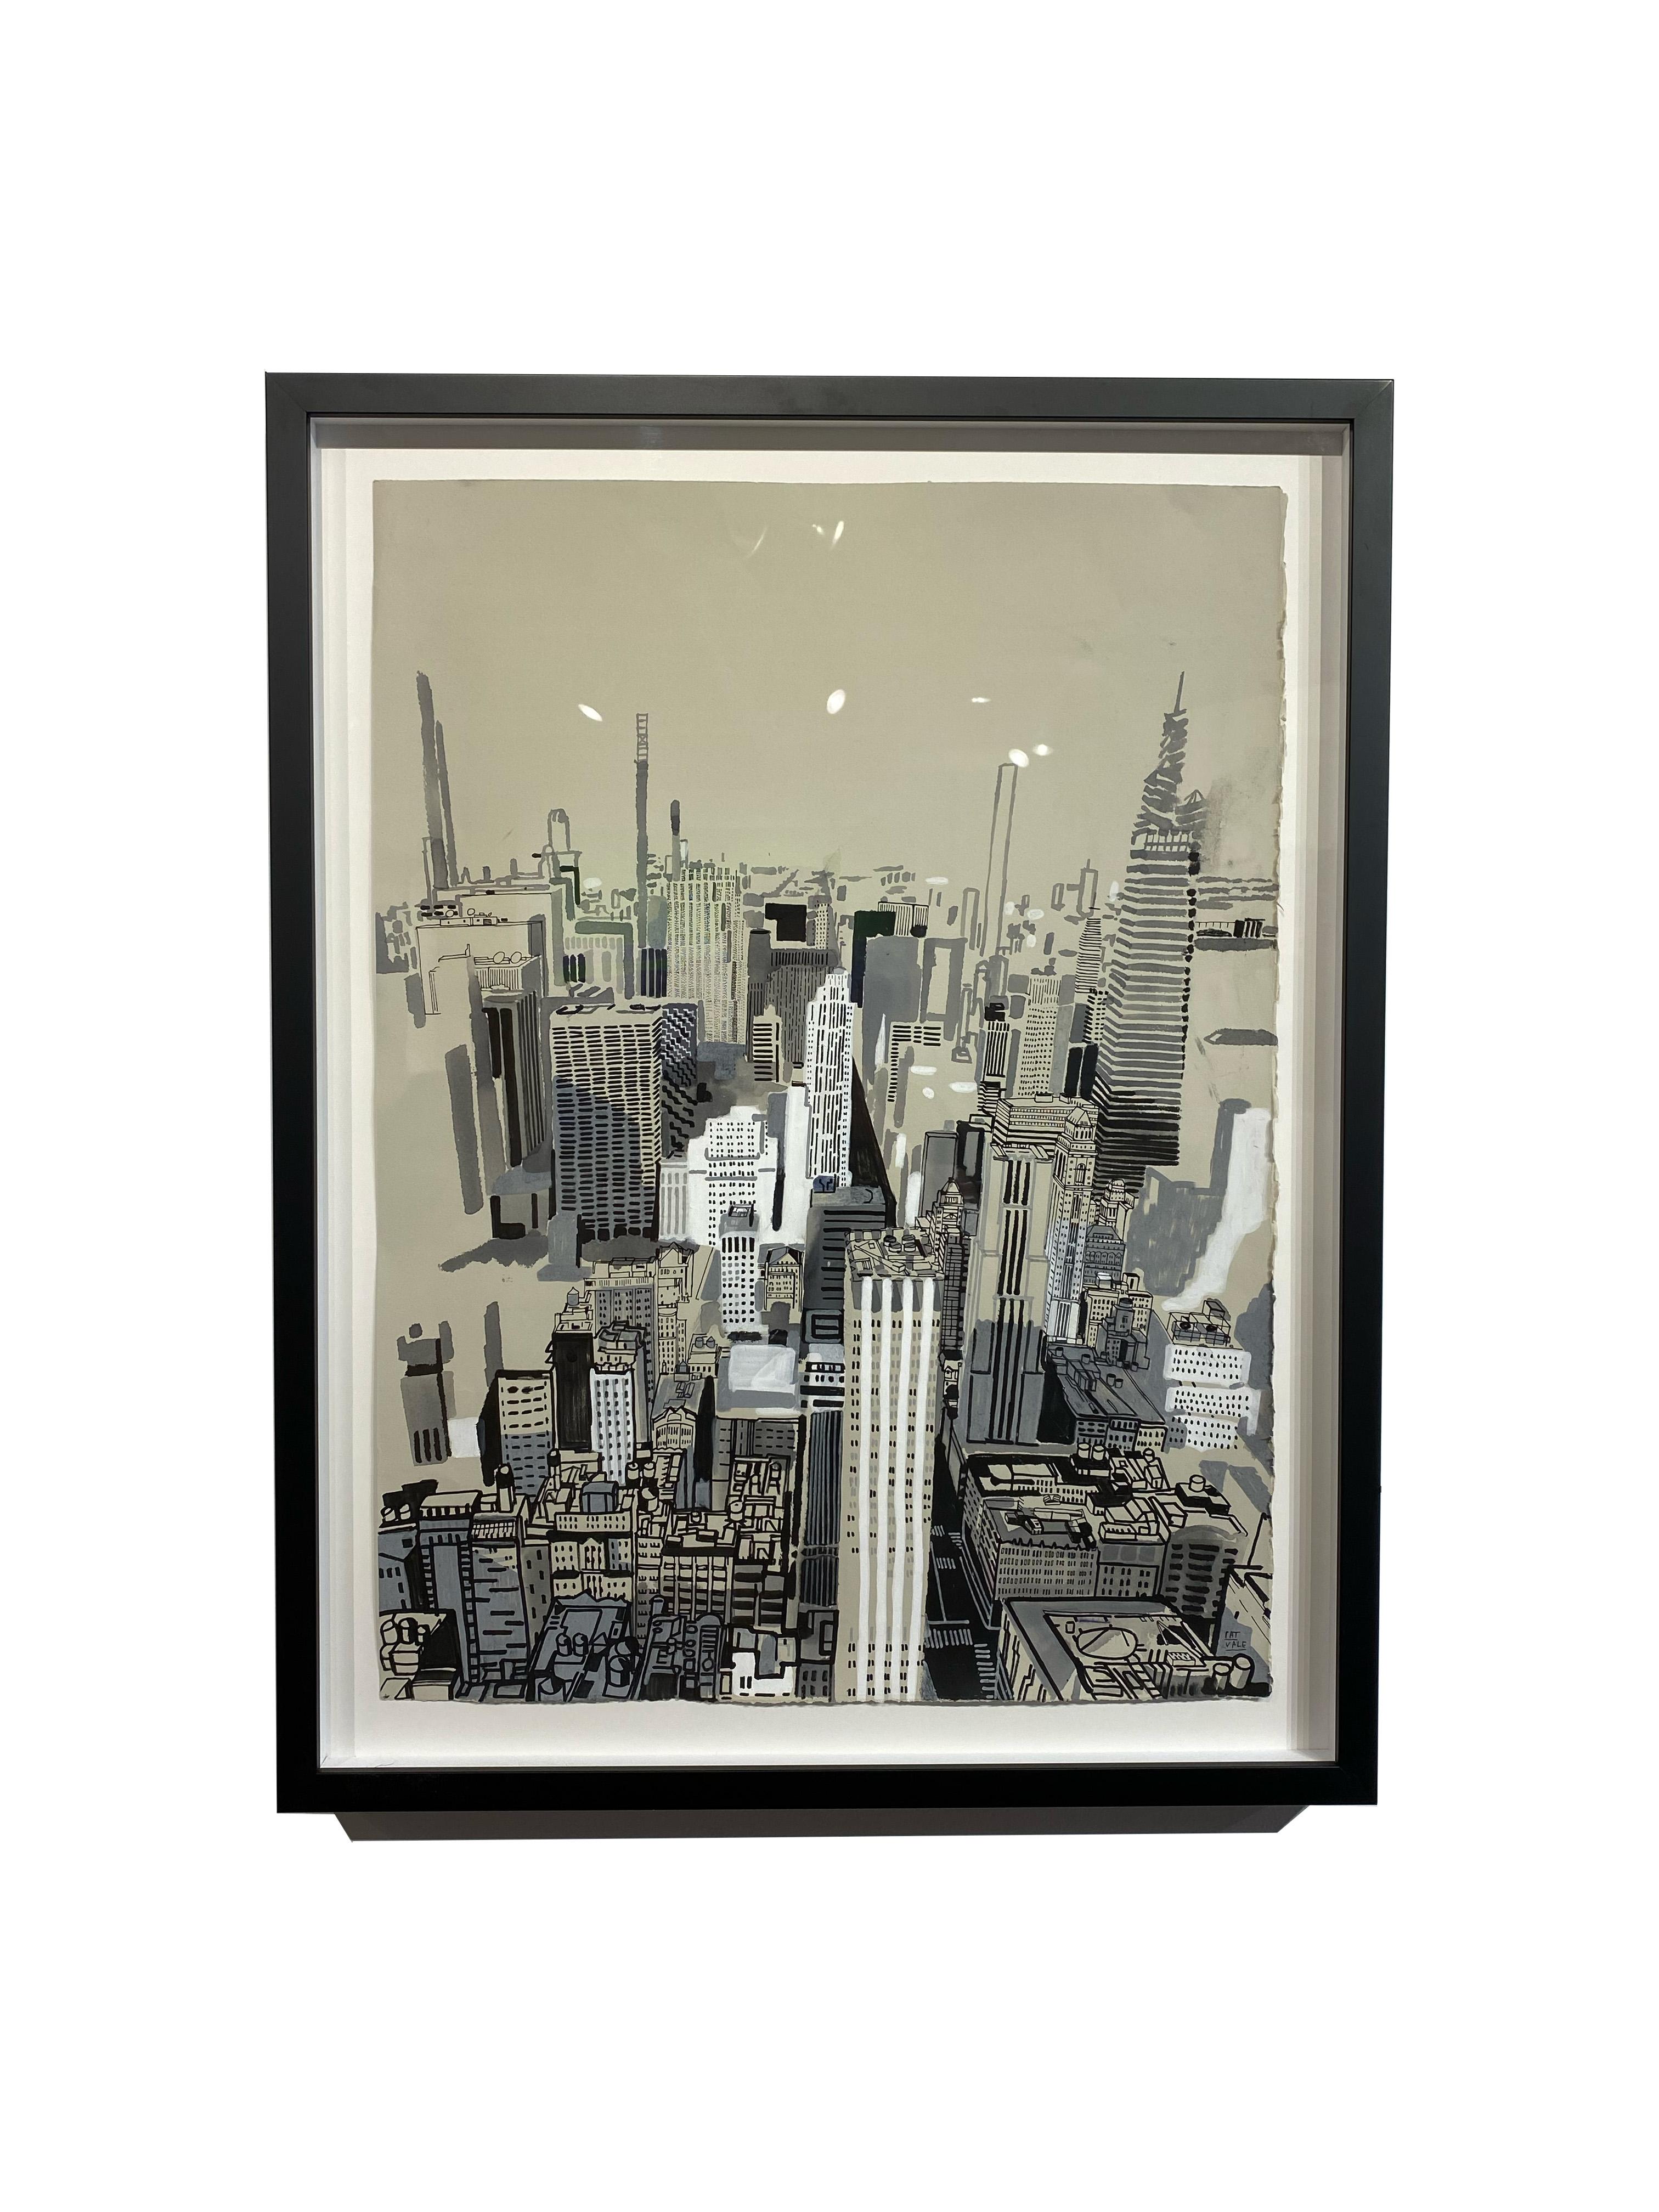 ES I - Birds Eye View of New York City, Original Acrylic & Ink on Paper, Framed - Art by Patrick Vale